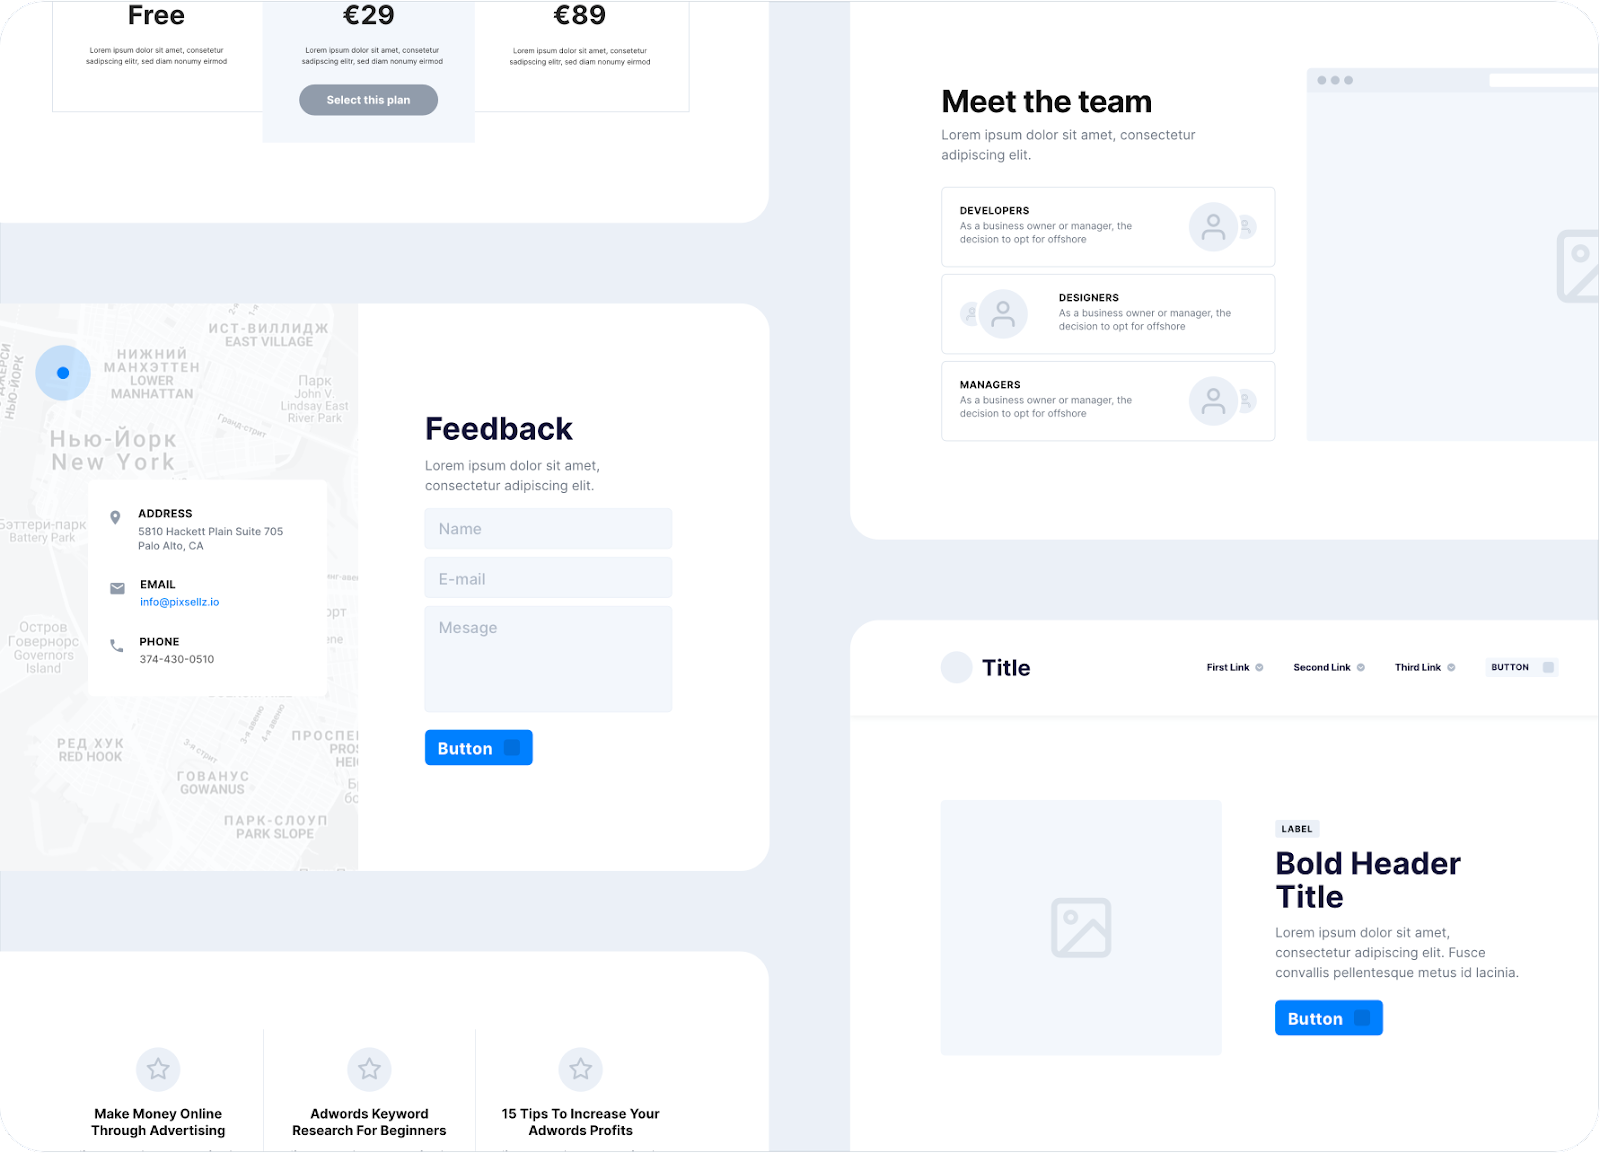 An array of basic layouts/templates in Proto.io including a team page, feedback page, and basic hero page.